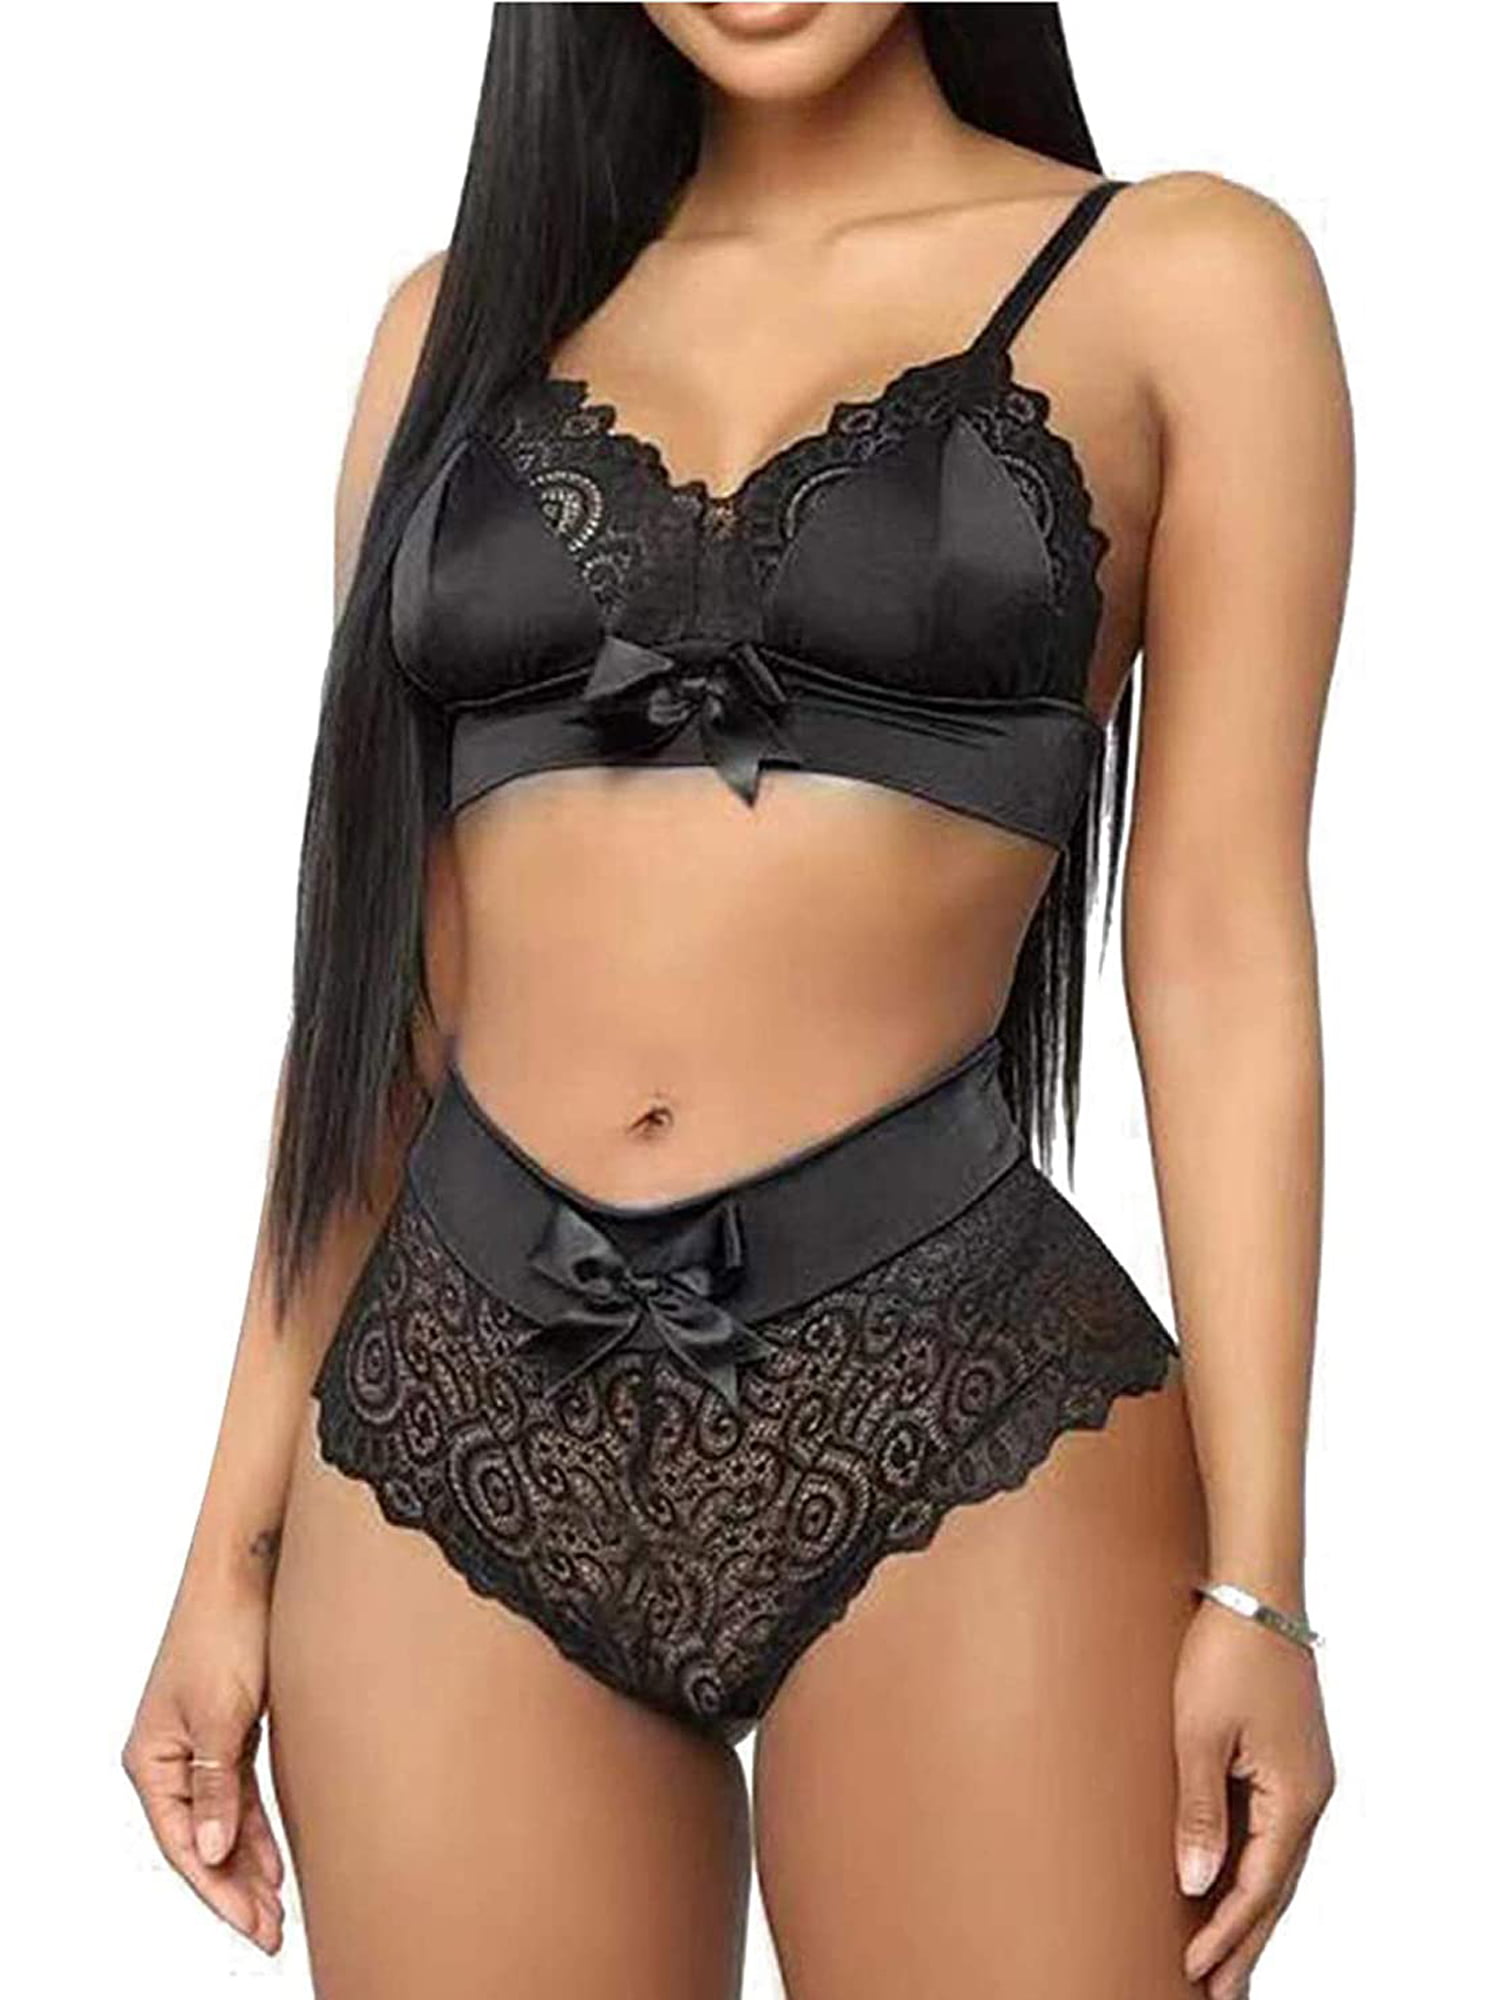 varsmiss Sexy See Through Unlined Bra Set Floral Lace Plus Size Underwear ( Black,32A) at  Women's Clothing store